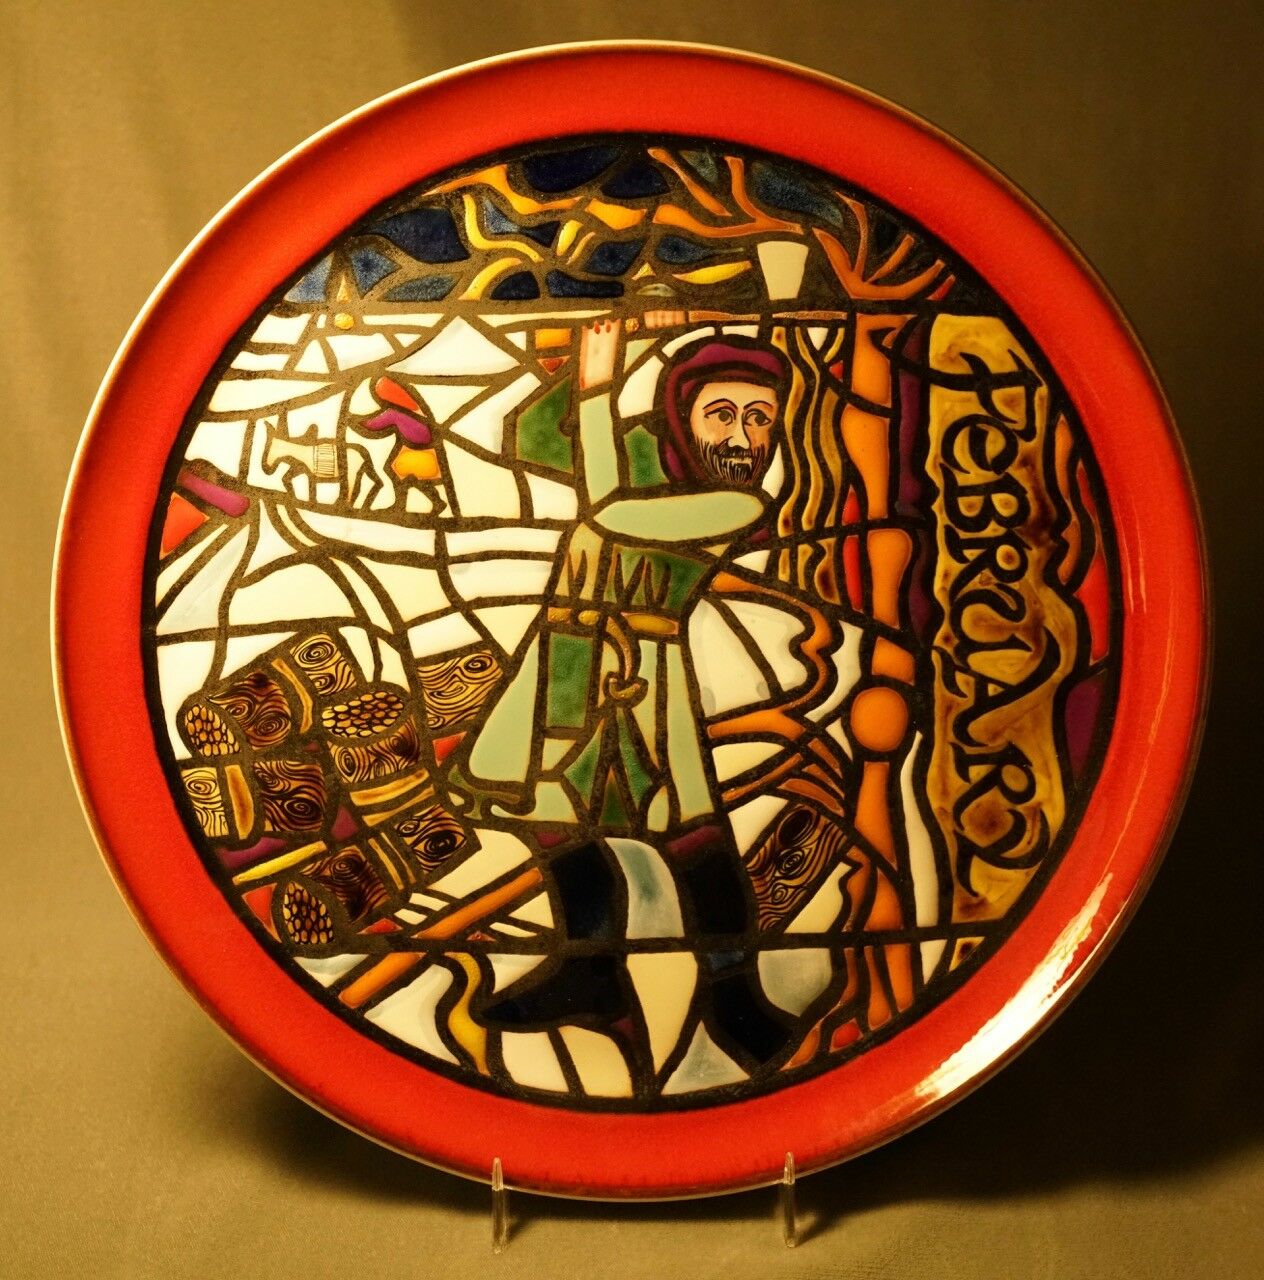 Poole Pottery Medieval Calendar Series Plate "february" By Tony Morris, C. 1972